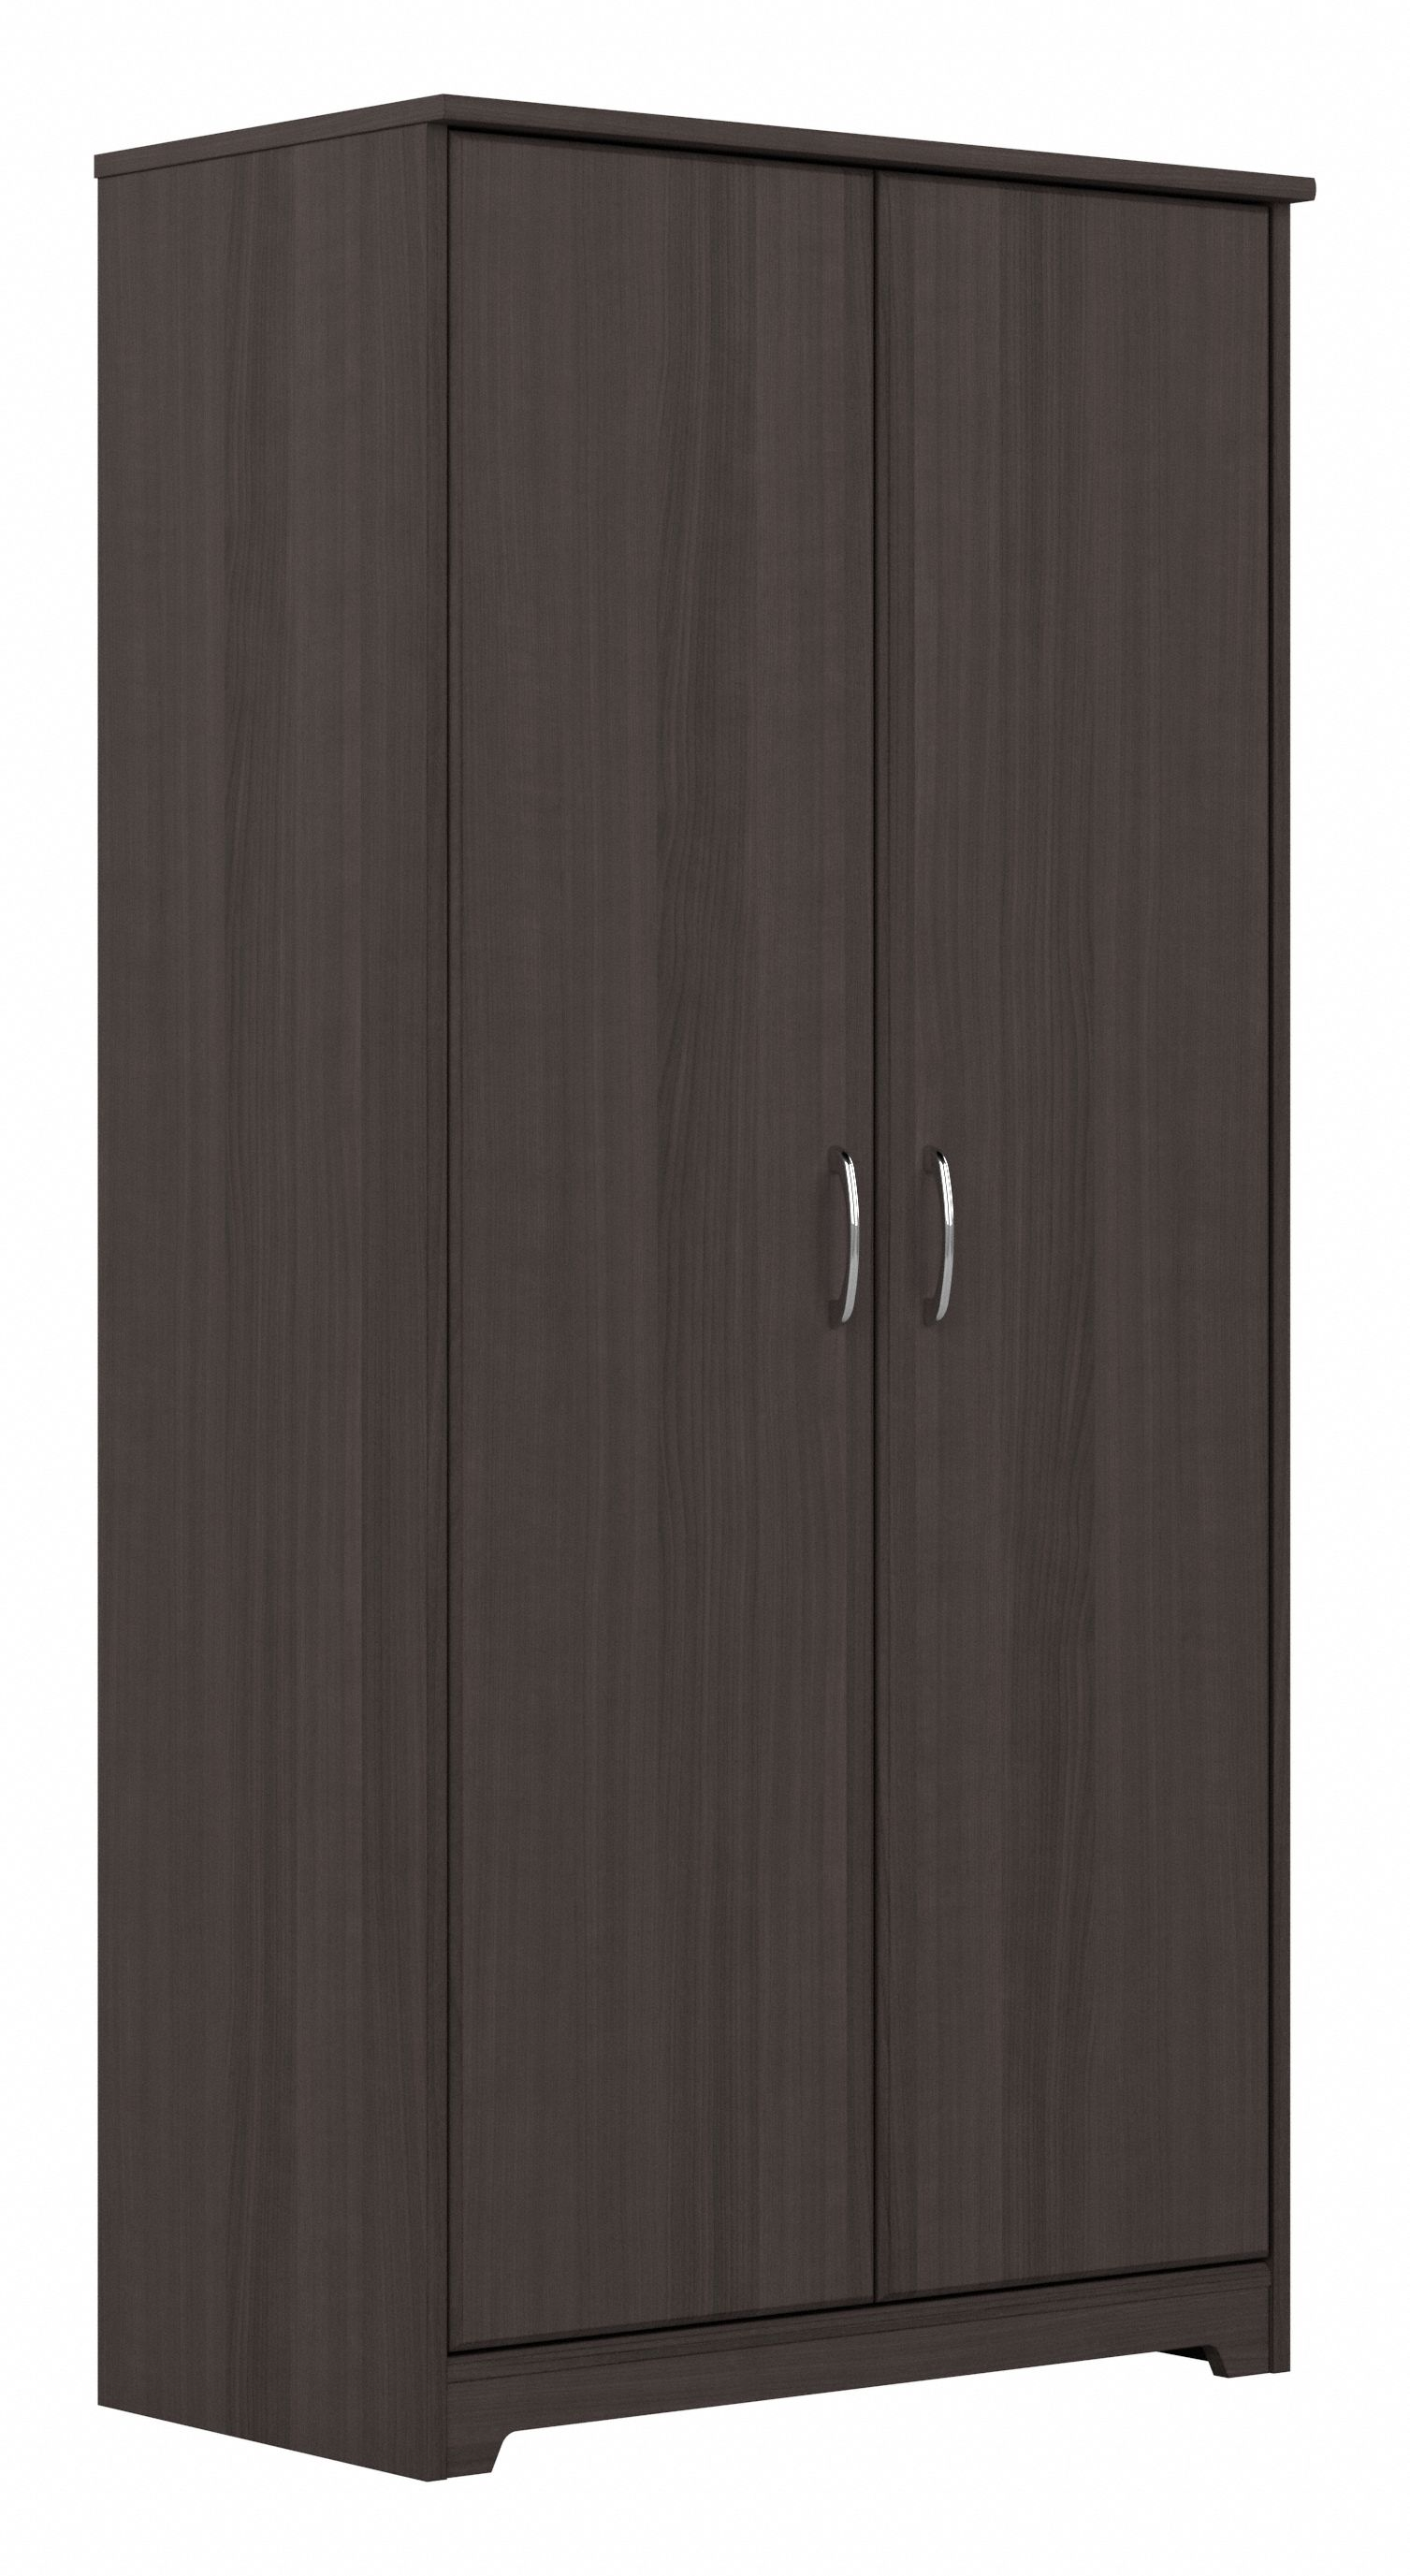 Shop Bush Furniture Cabot Tall Bathroom Storage Cabinet with Doors 02 WC31799-Z1 #color_heather gray